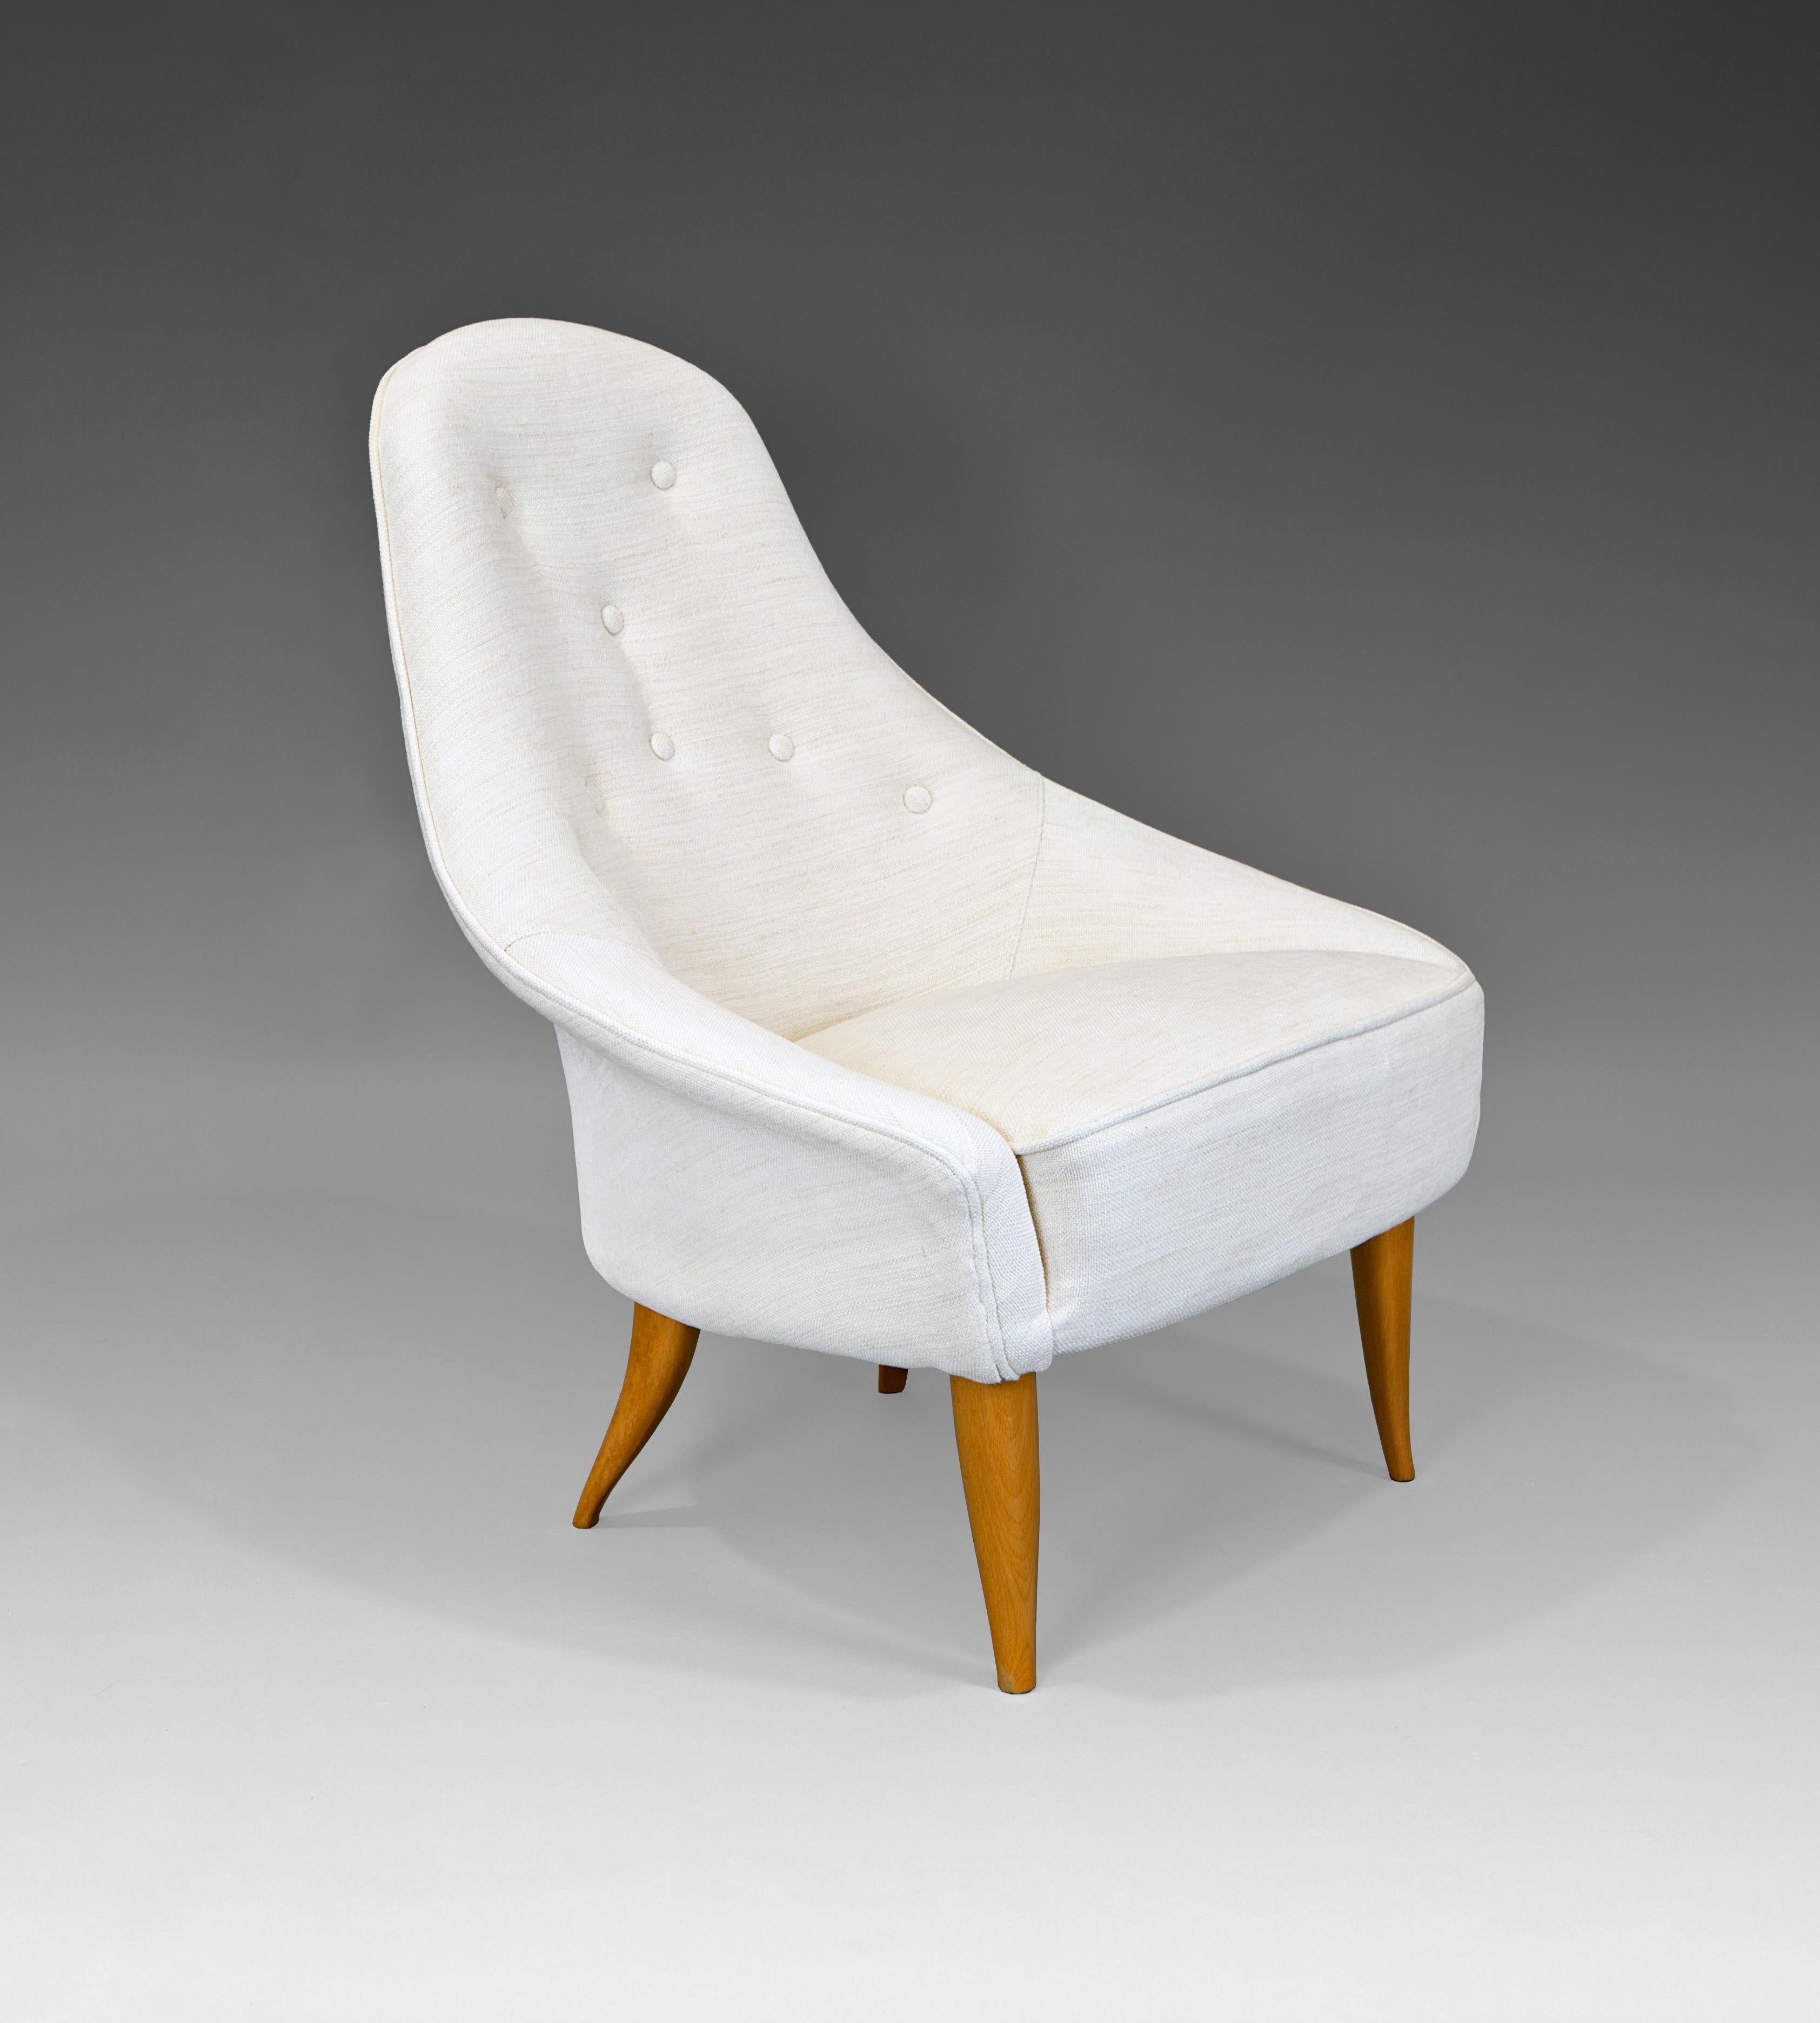 “Lilla Eva” armchair by Kerstin Hörlin-Holmquist for Nordiska Kompaniet in beech and upholstery. Belonging to “Paradise” series for the Project Triva by NK. Sweden, 1950s. Excellent condition, restored and reupholstered.